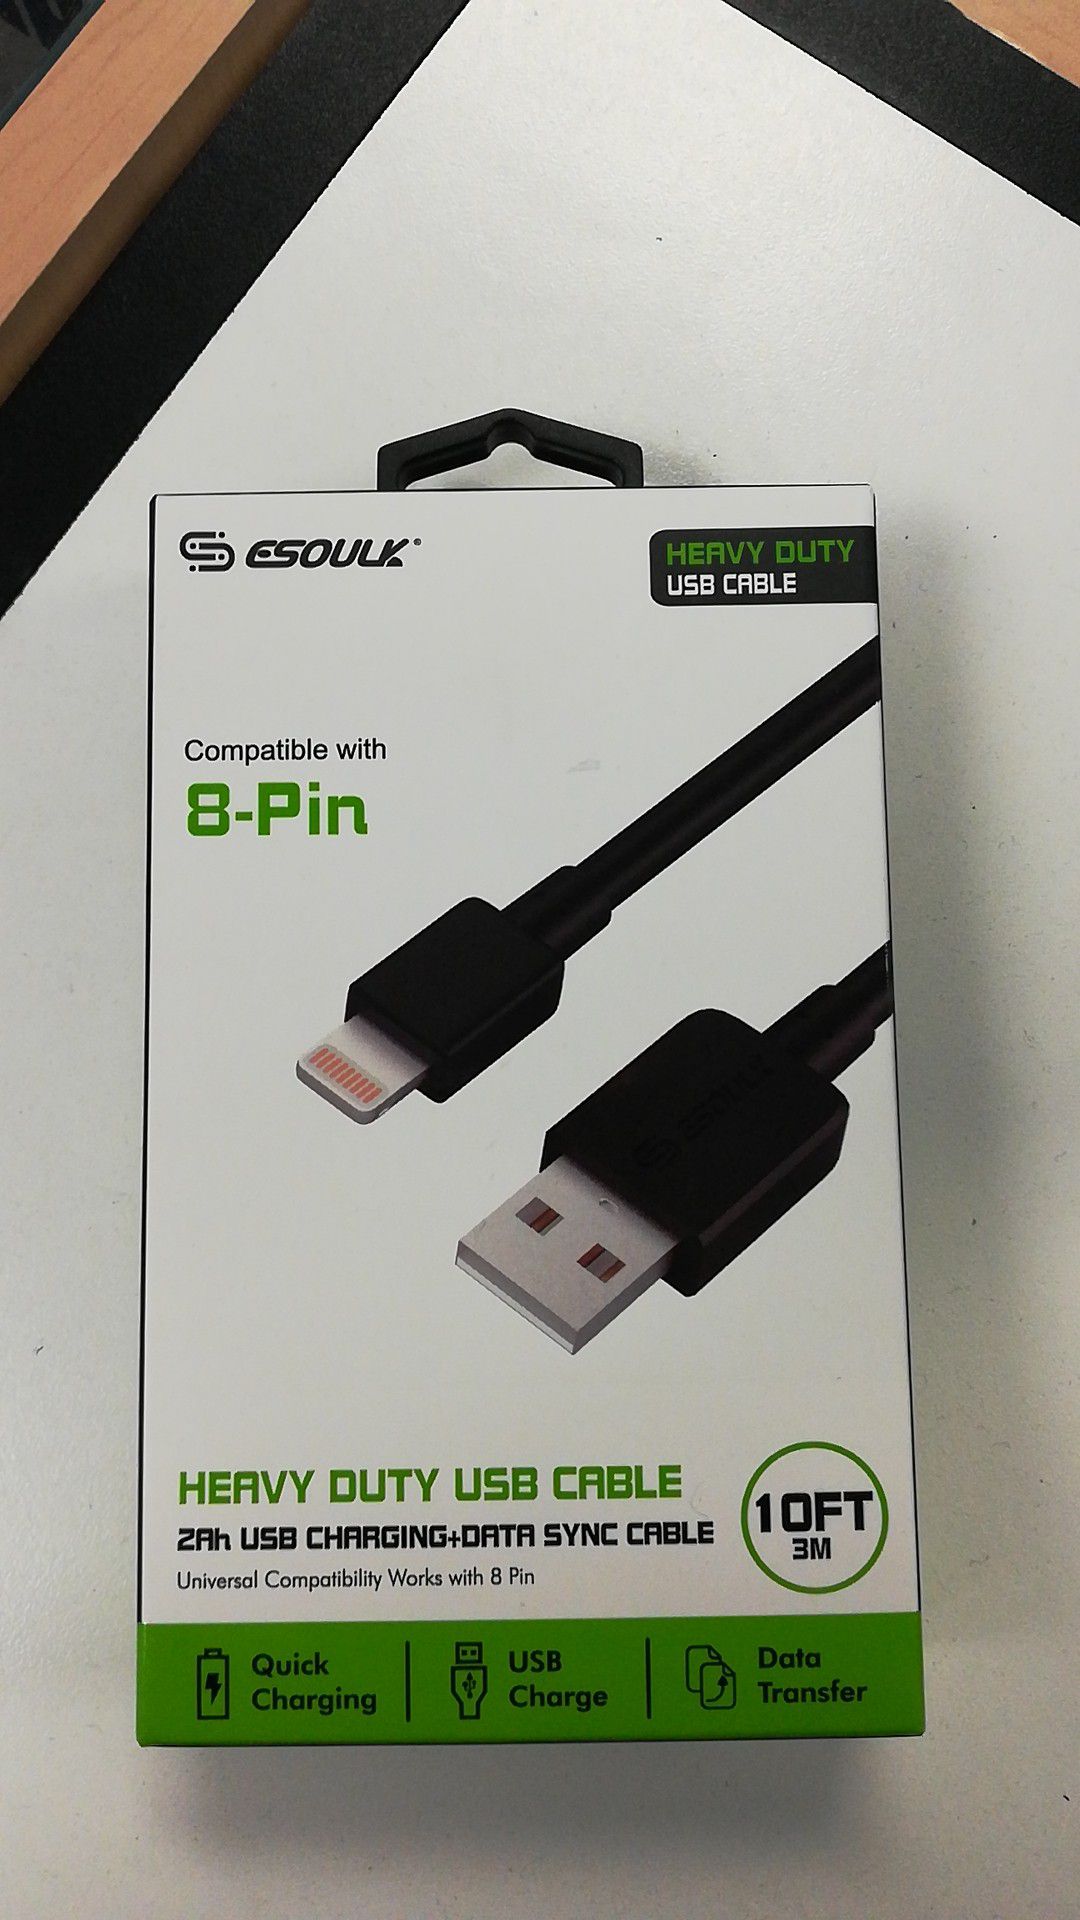 10 Ft Charging Cable for Apple Devices